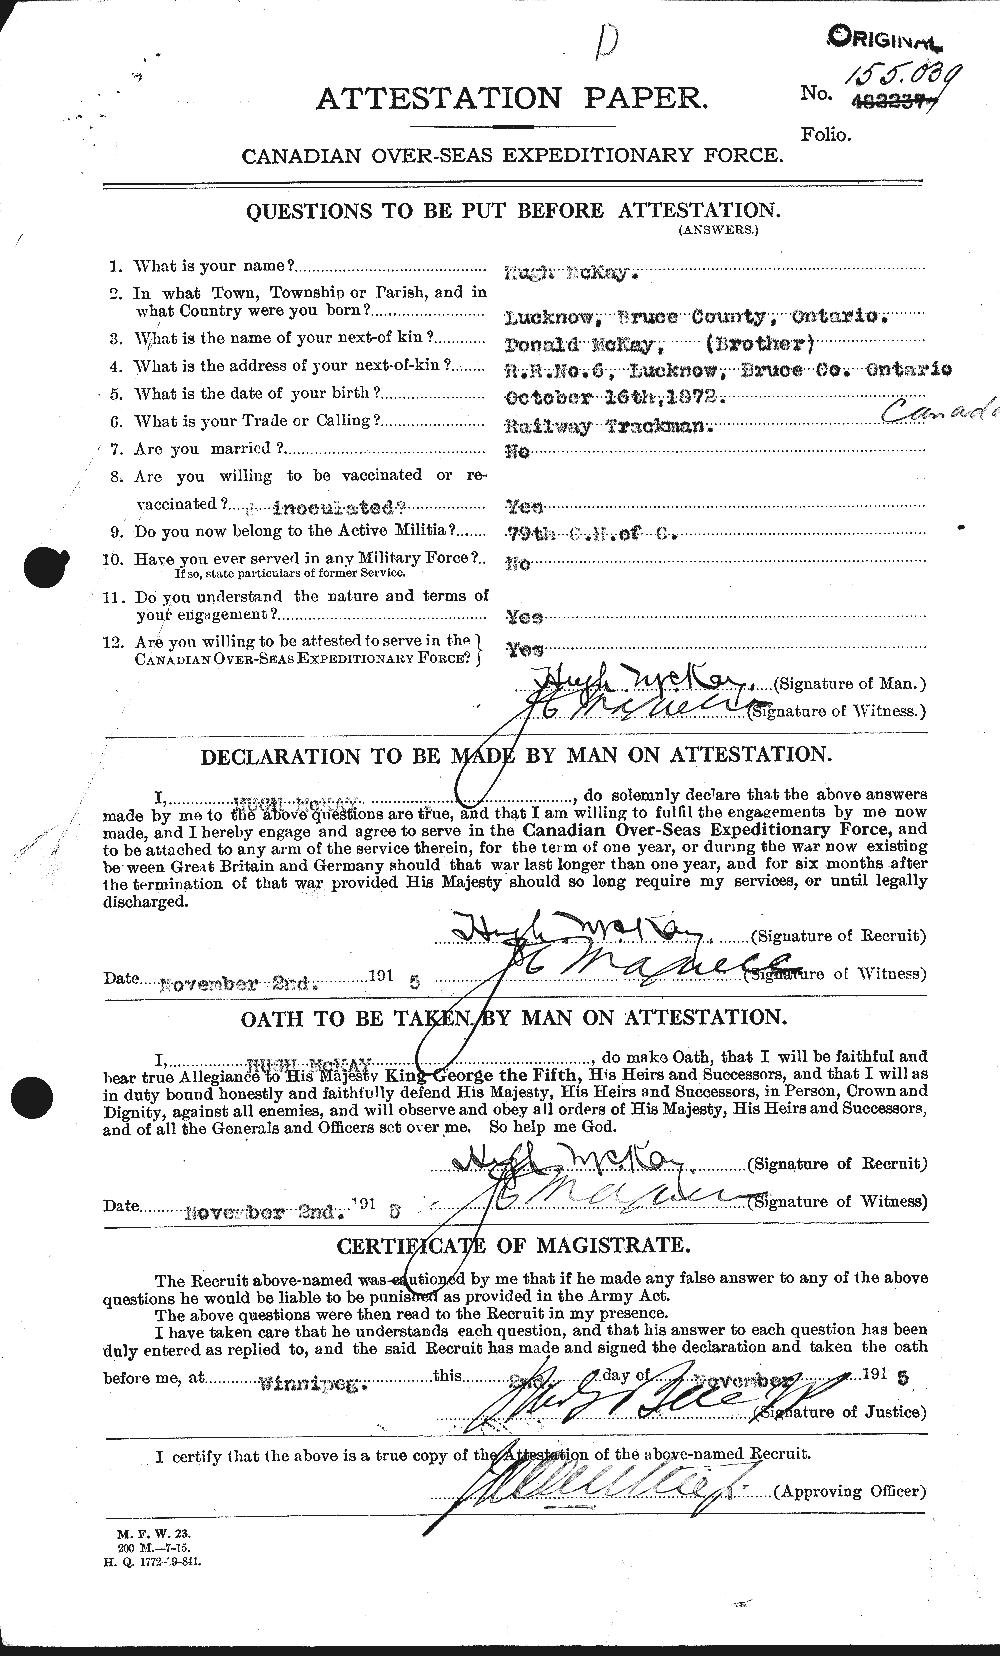 Personnel Records of the First World War - CEF 534759a